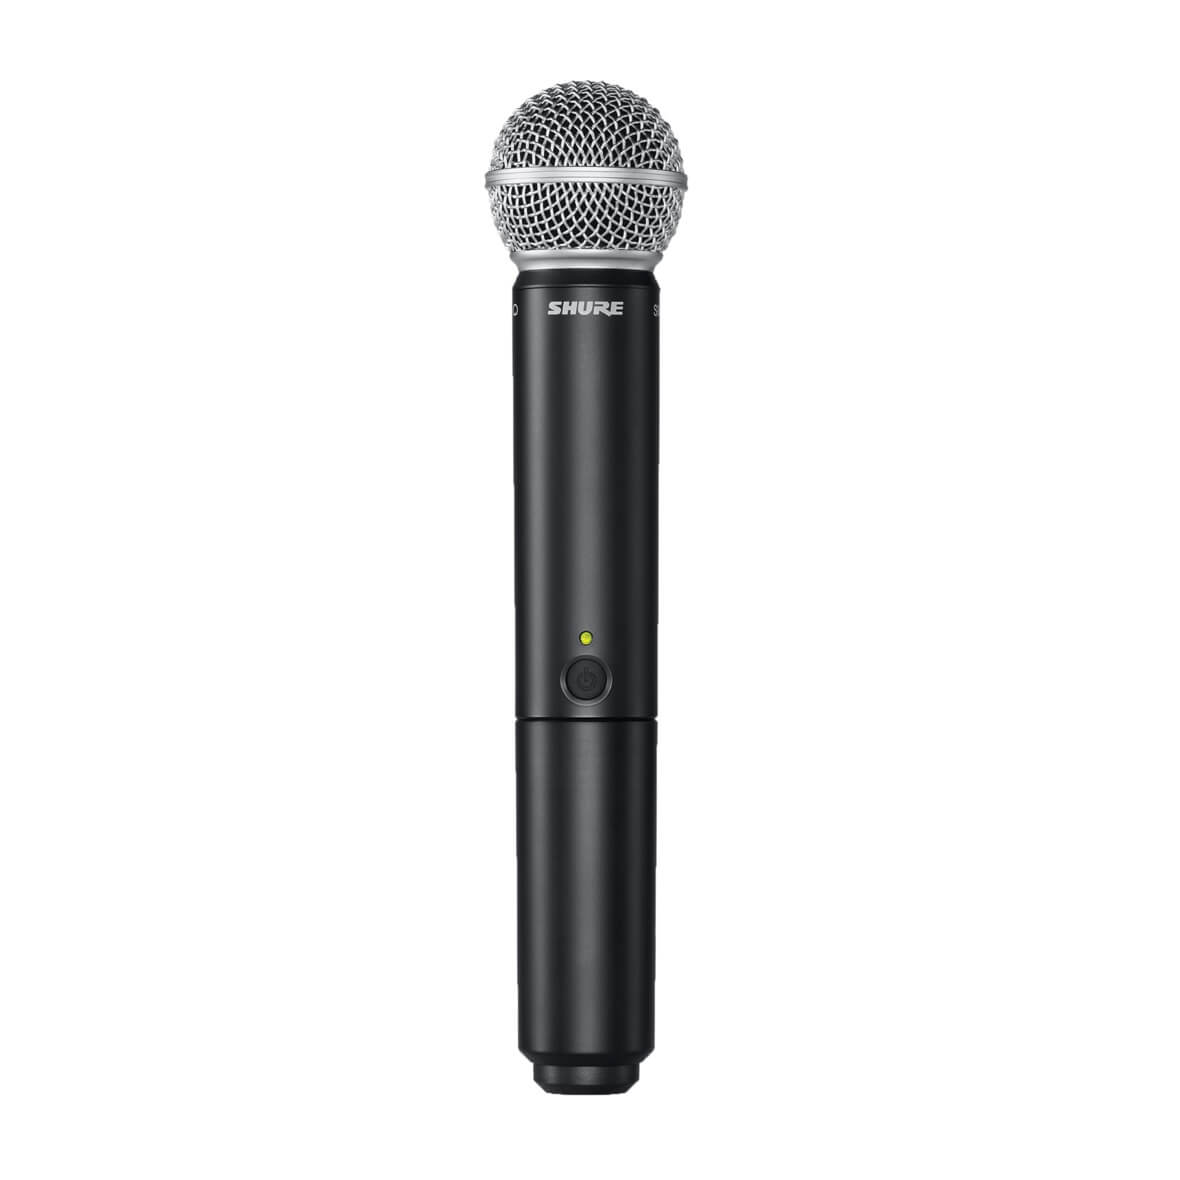 Shure BLX2/SM58 Handheld transmitter with SM58 capsule